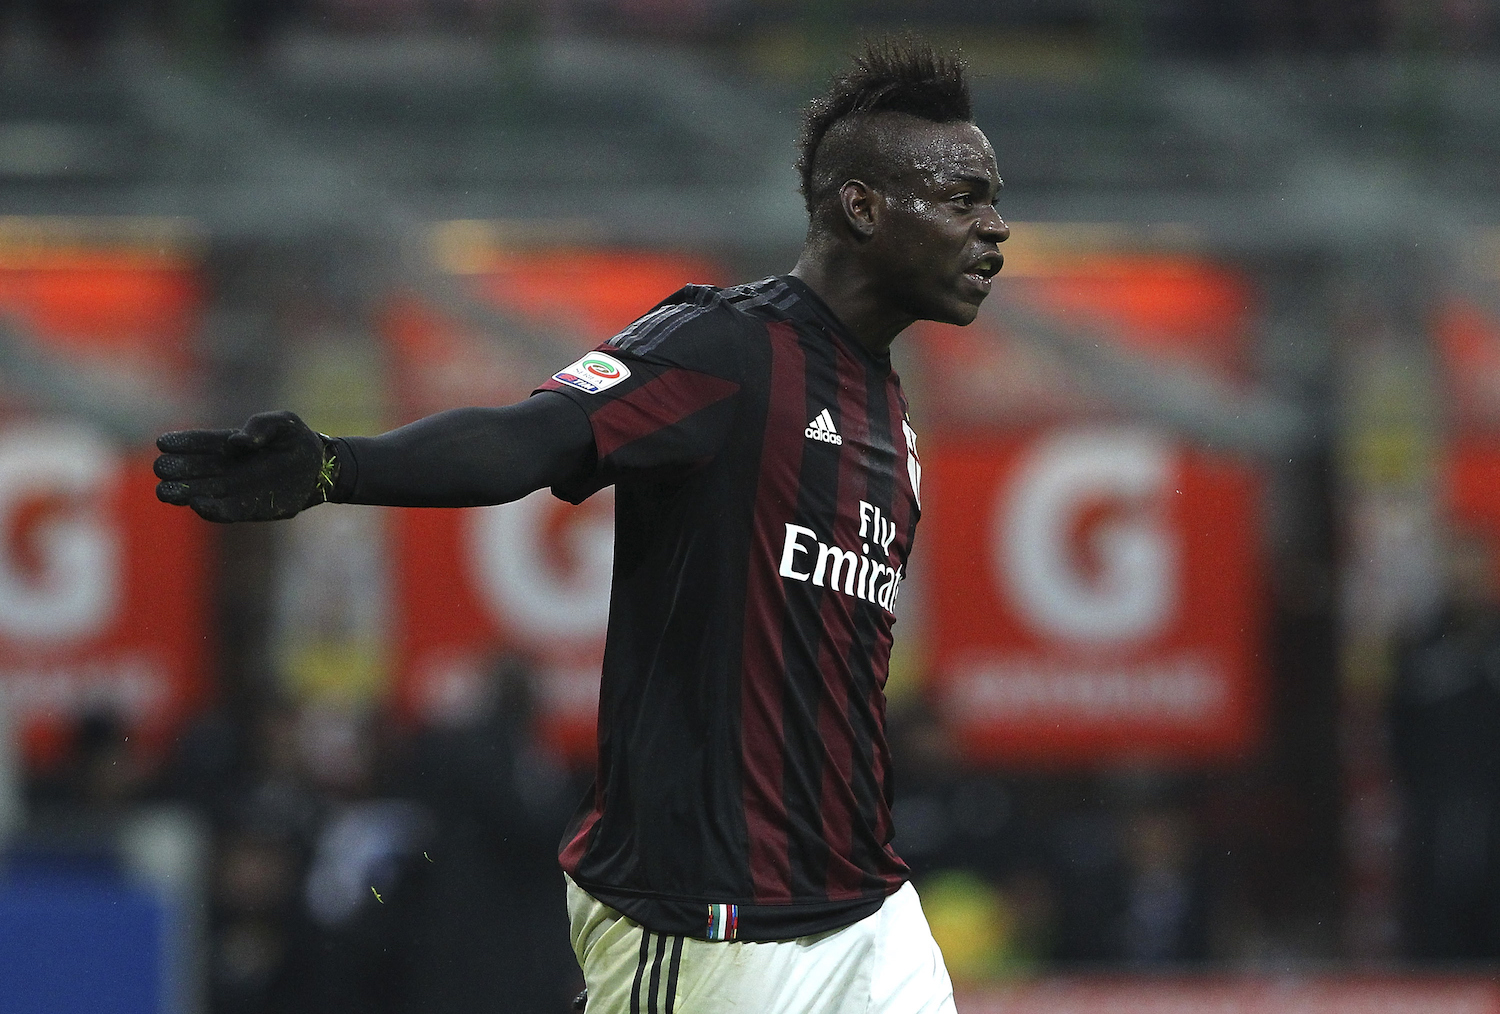 Balotelli heading for the exit door? | Marco Luzzani/Getty Images